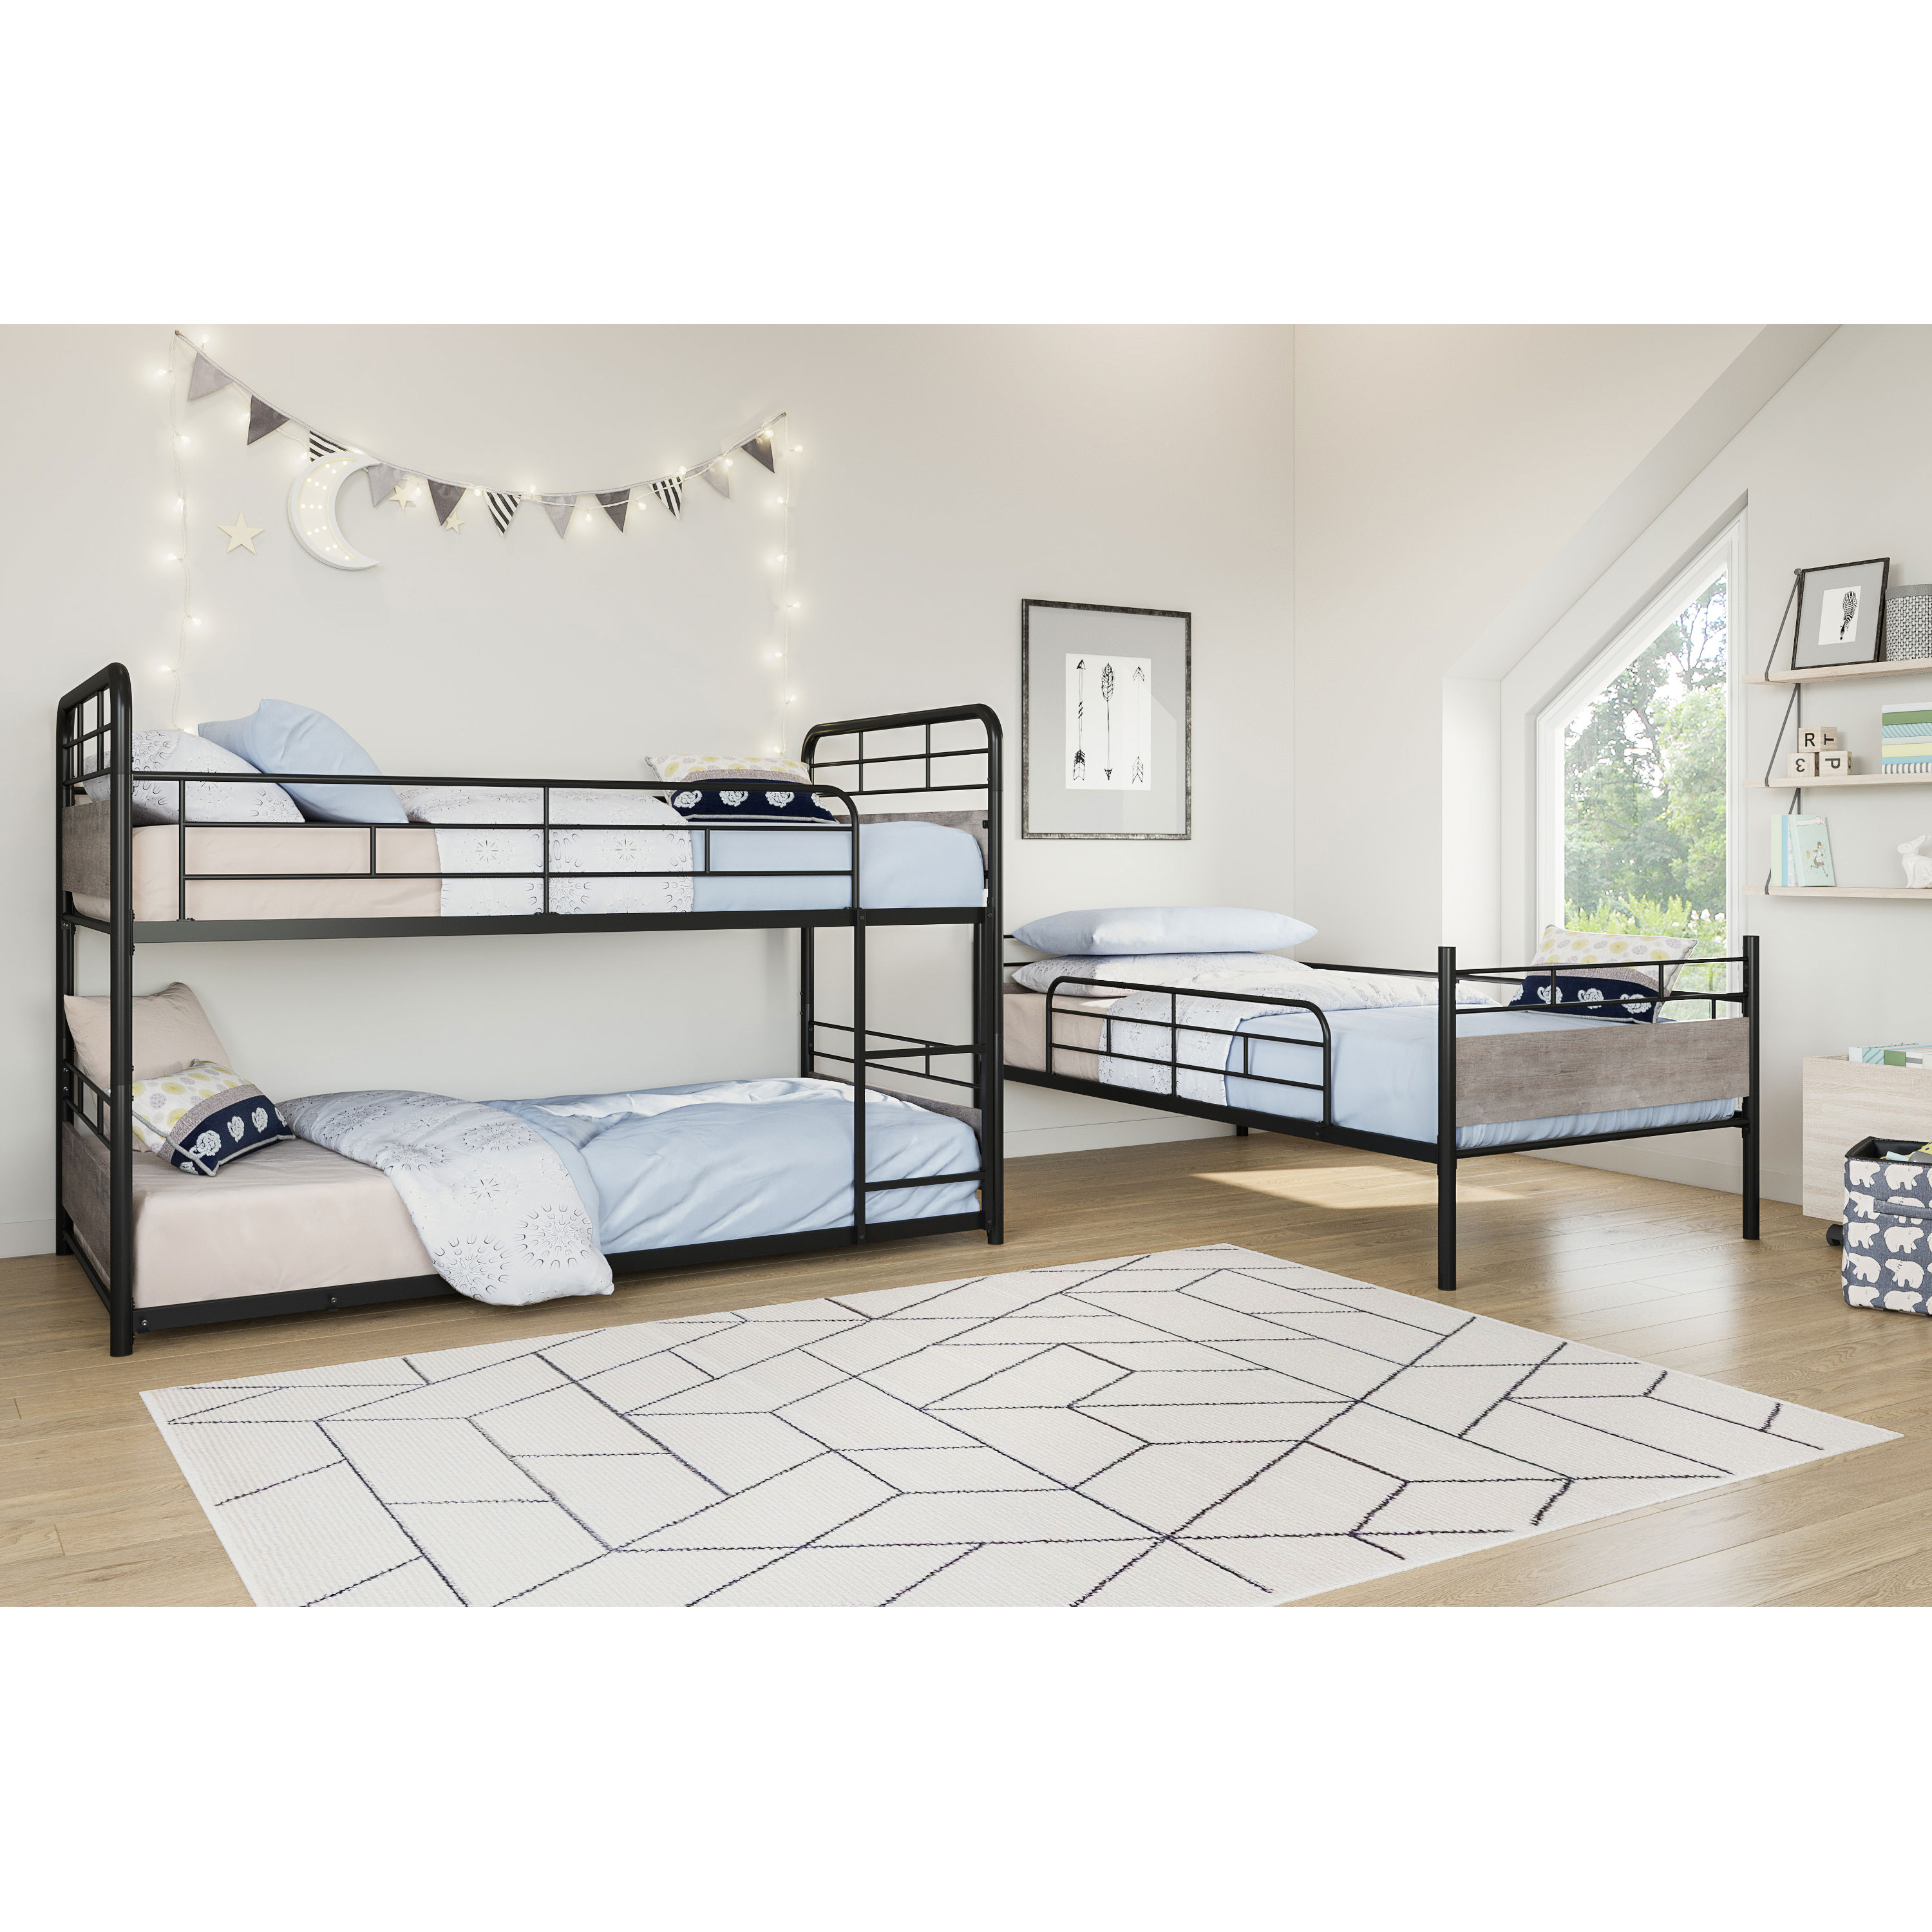 Better Homes & Gardens Anniston Convertible Black Metal Triple Twin Bunk Bed, Gray Wood Accents - image 3 of 26